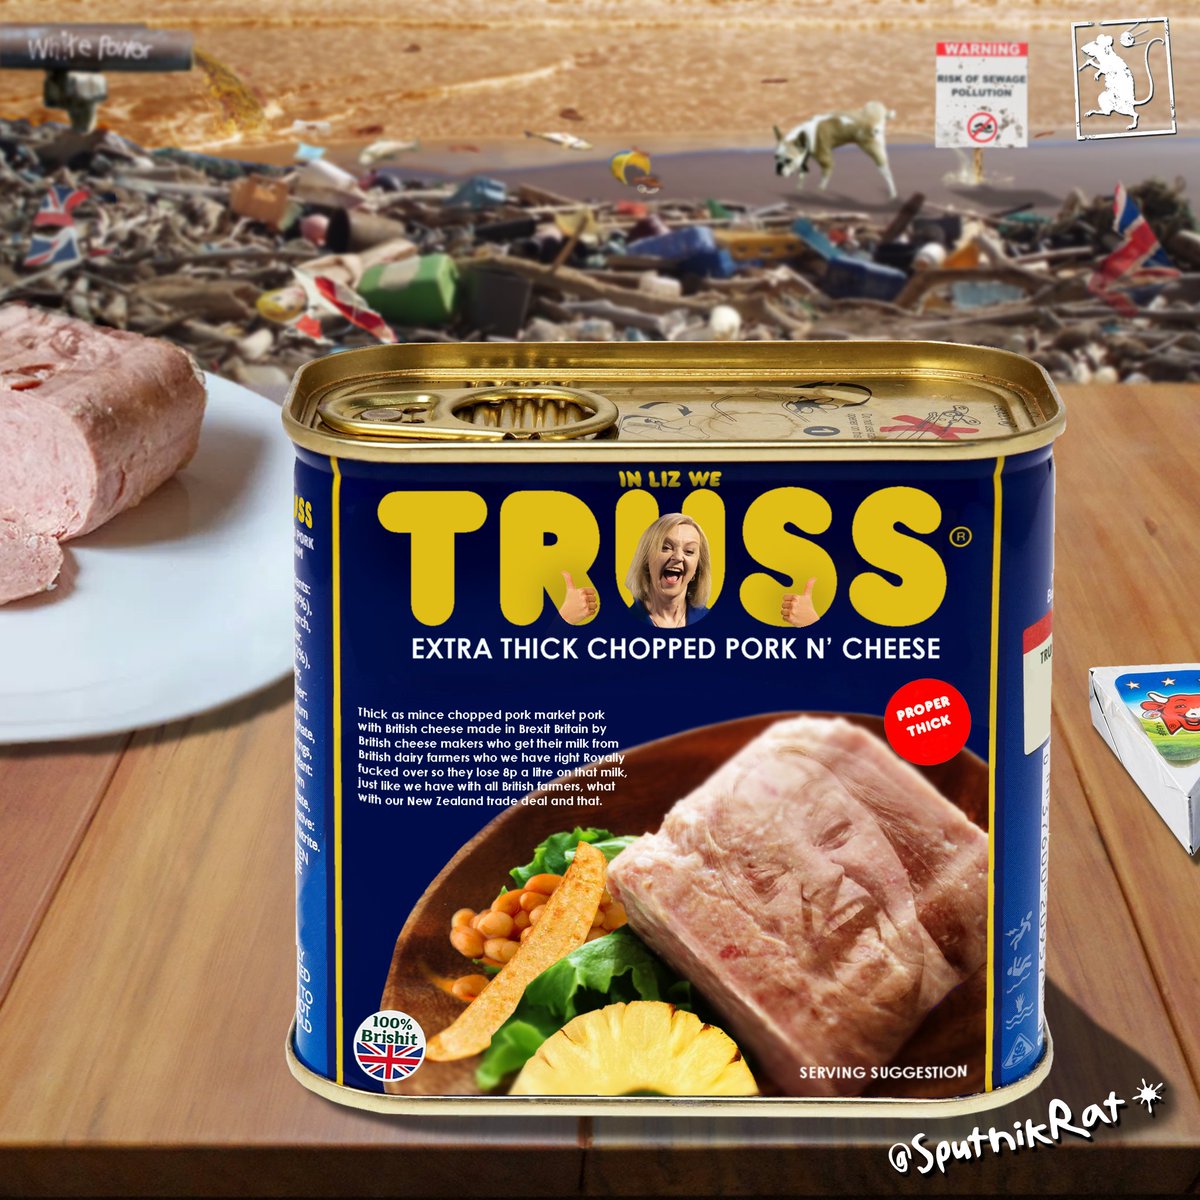 I picked up this tin of luncheon meat from my local Lidldi branch this morning. Perfect for a picnic on the beach. #ToryCorruption #TorySewageParty #LizTruss